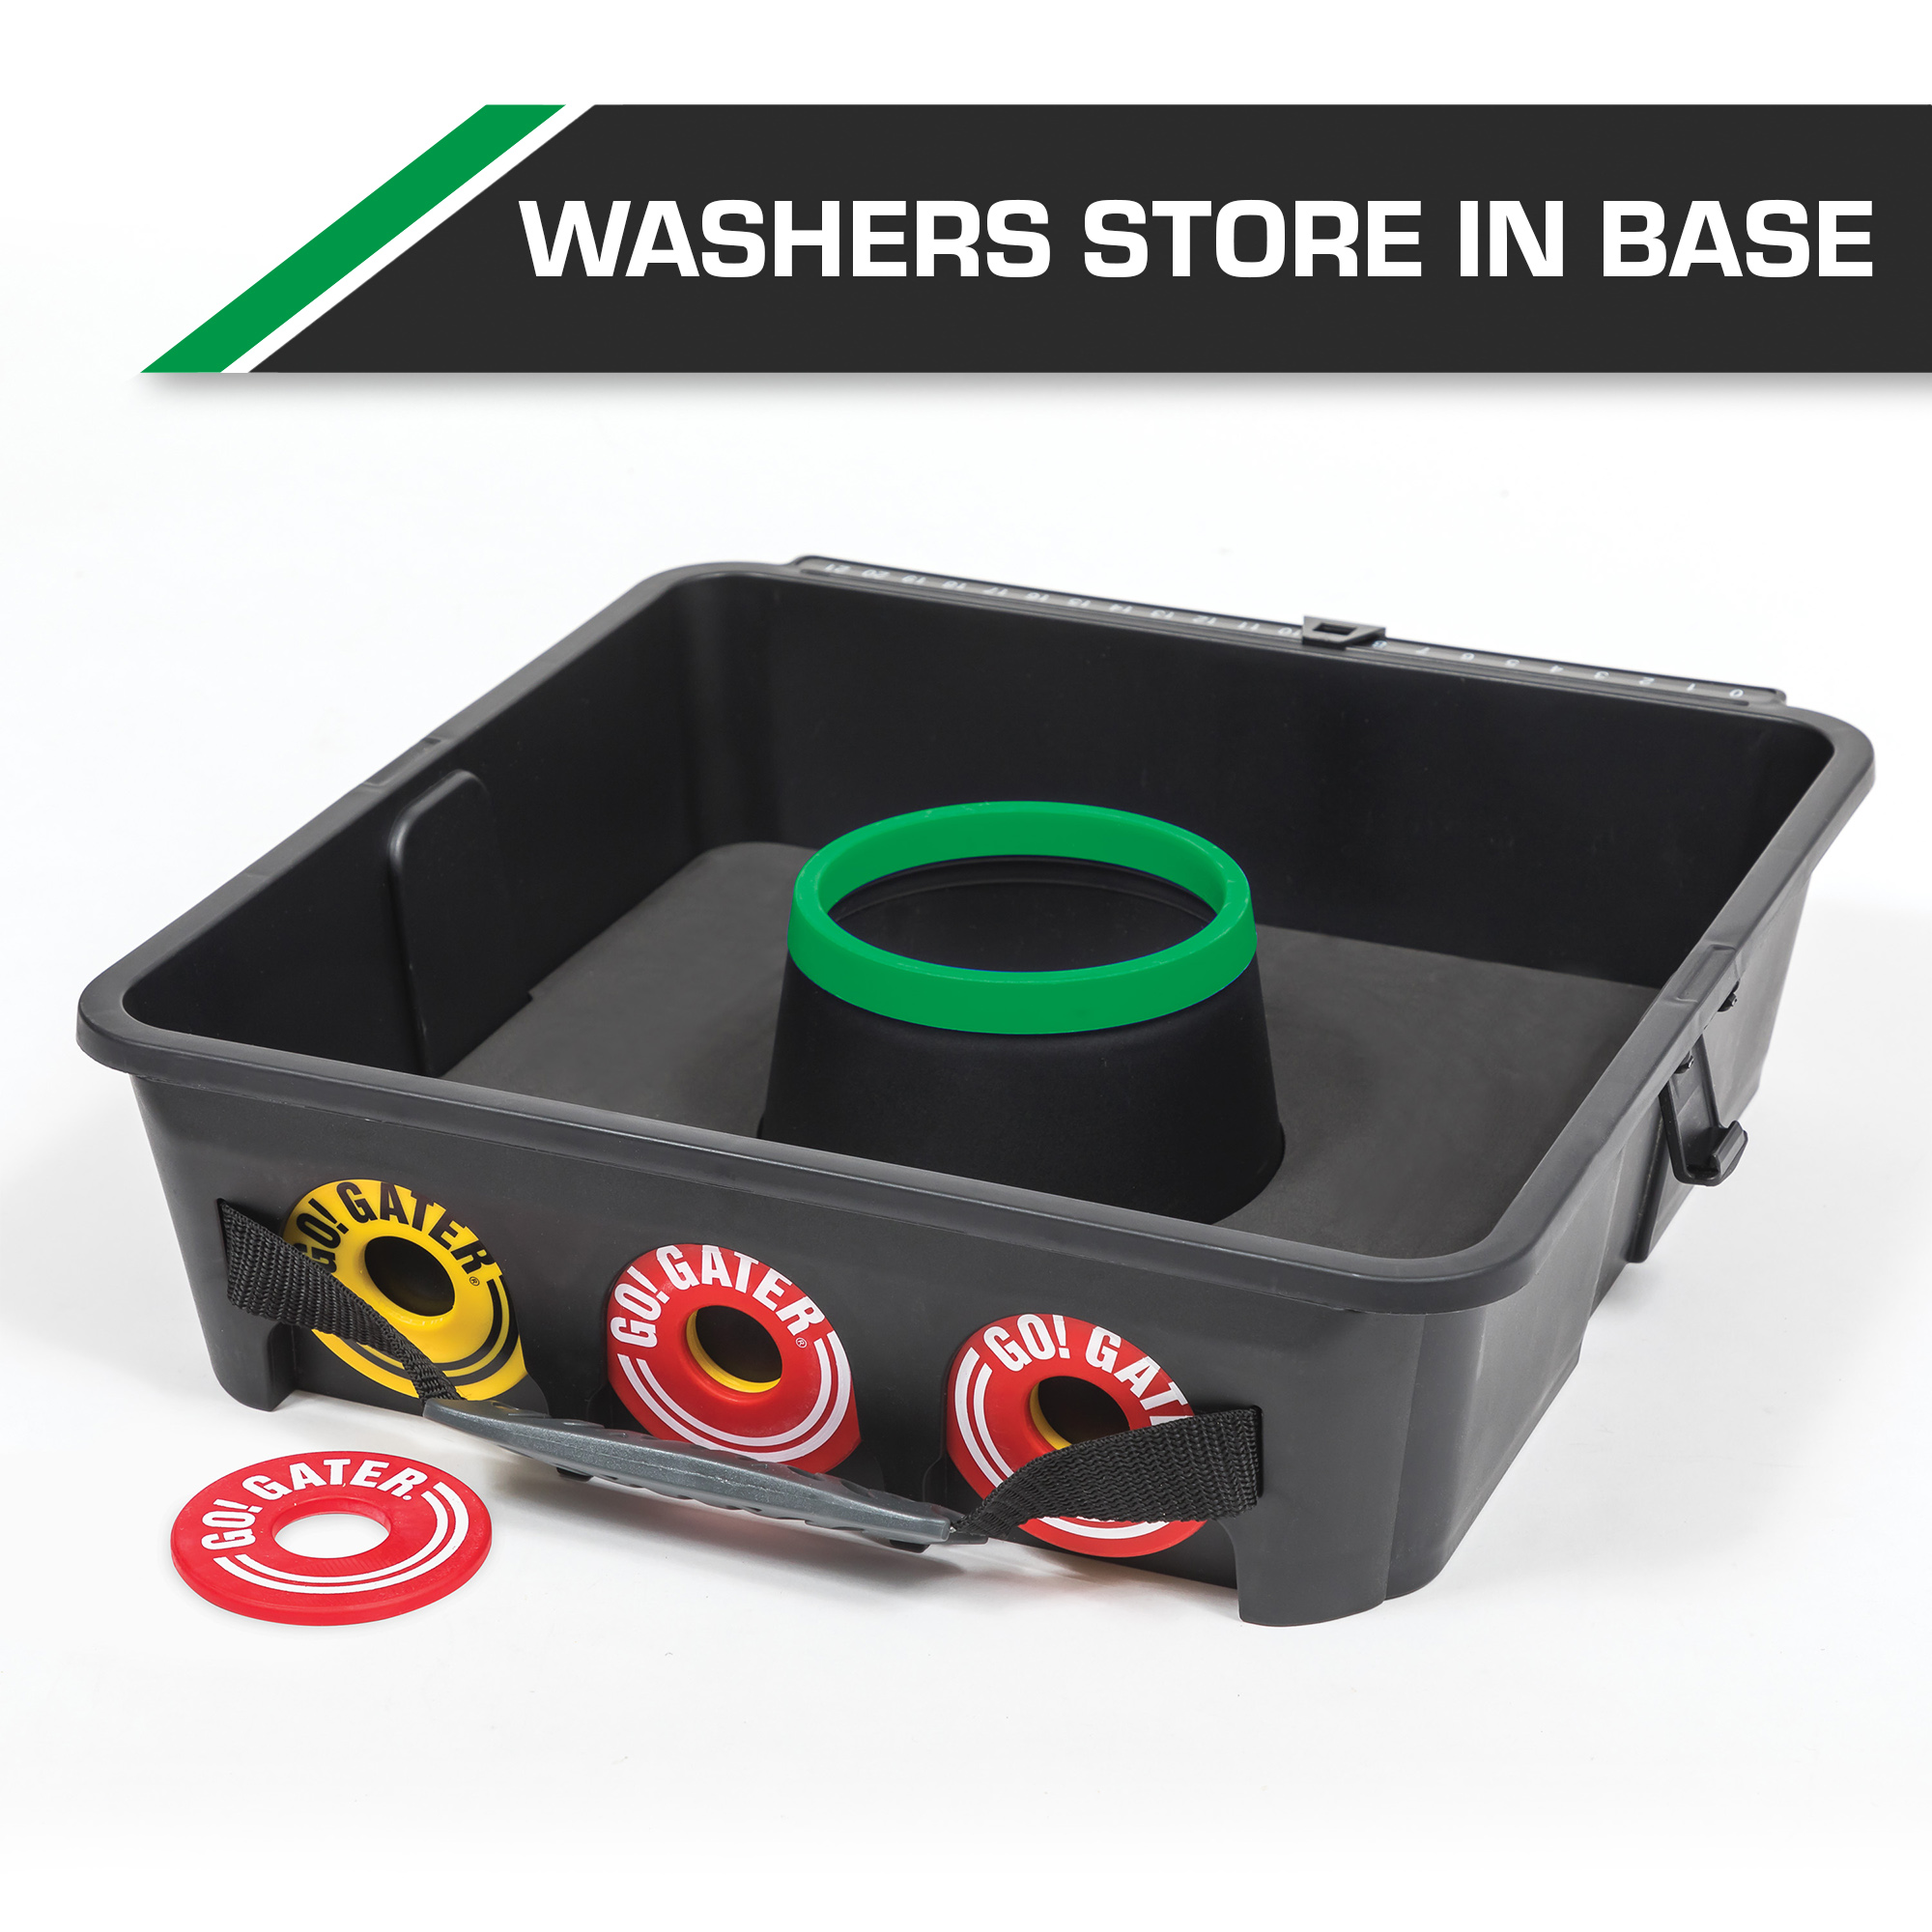 Go! Gater Weatherproof Portable Washer Target Toss Game - image 3 of 8